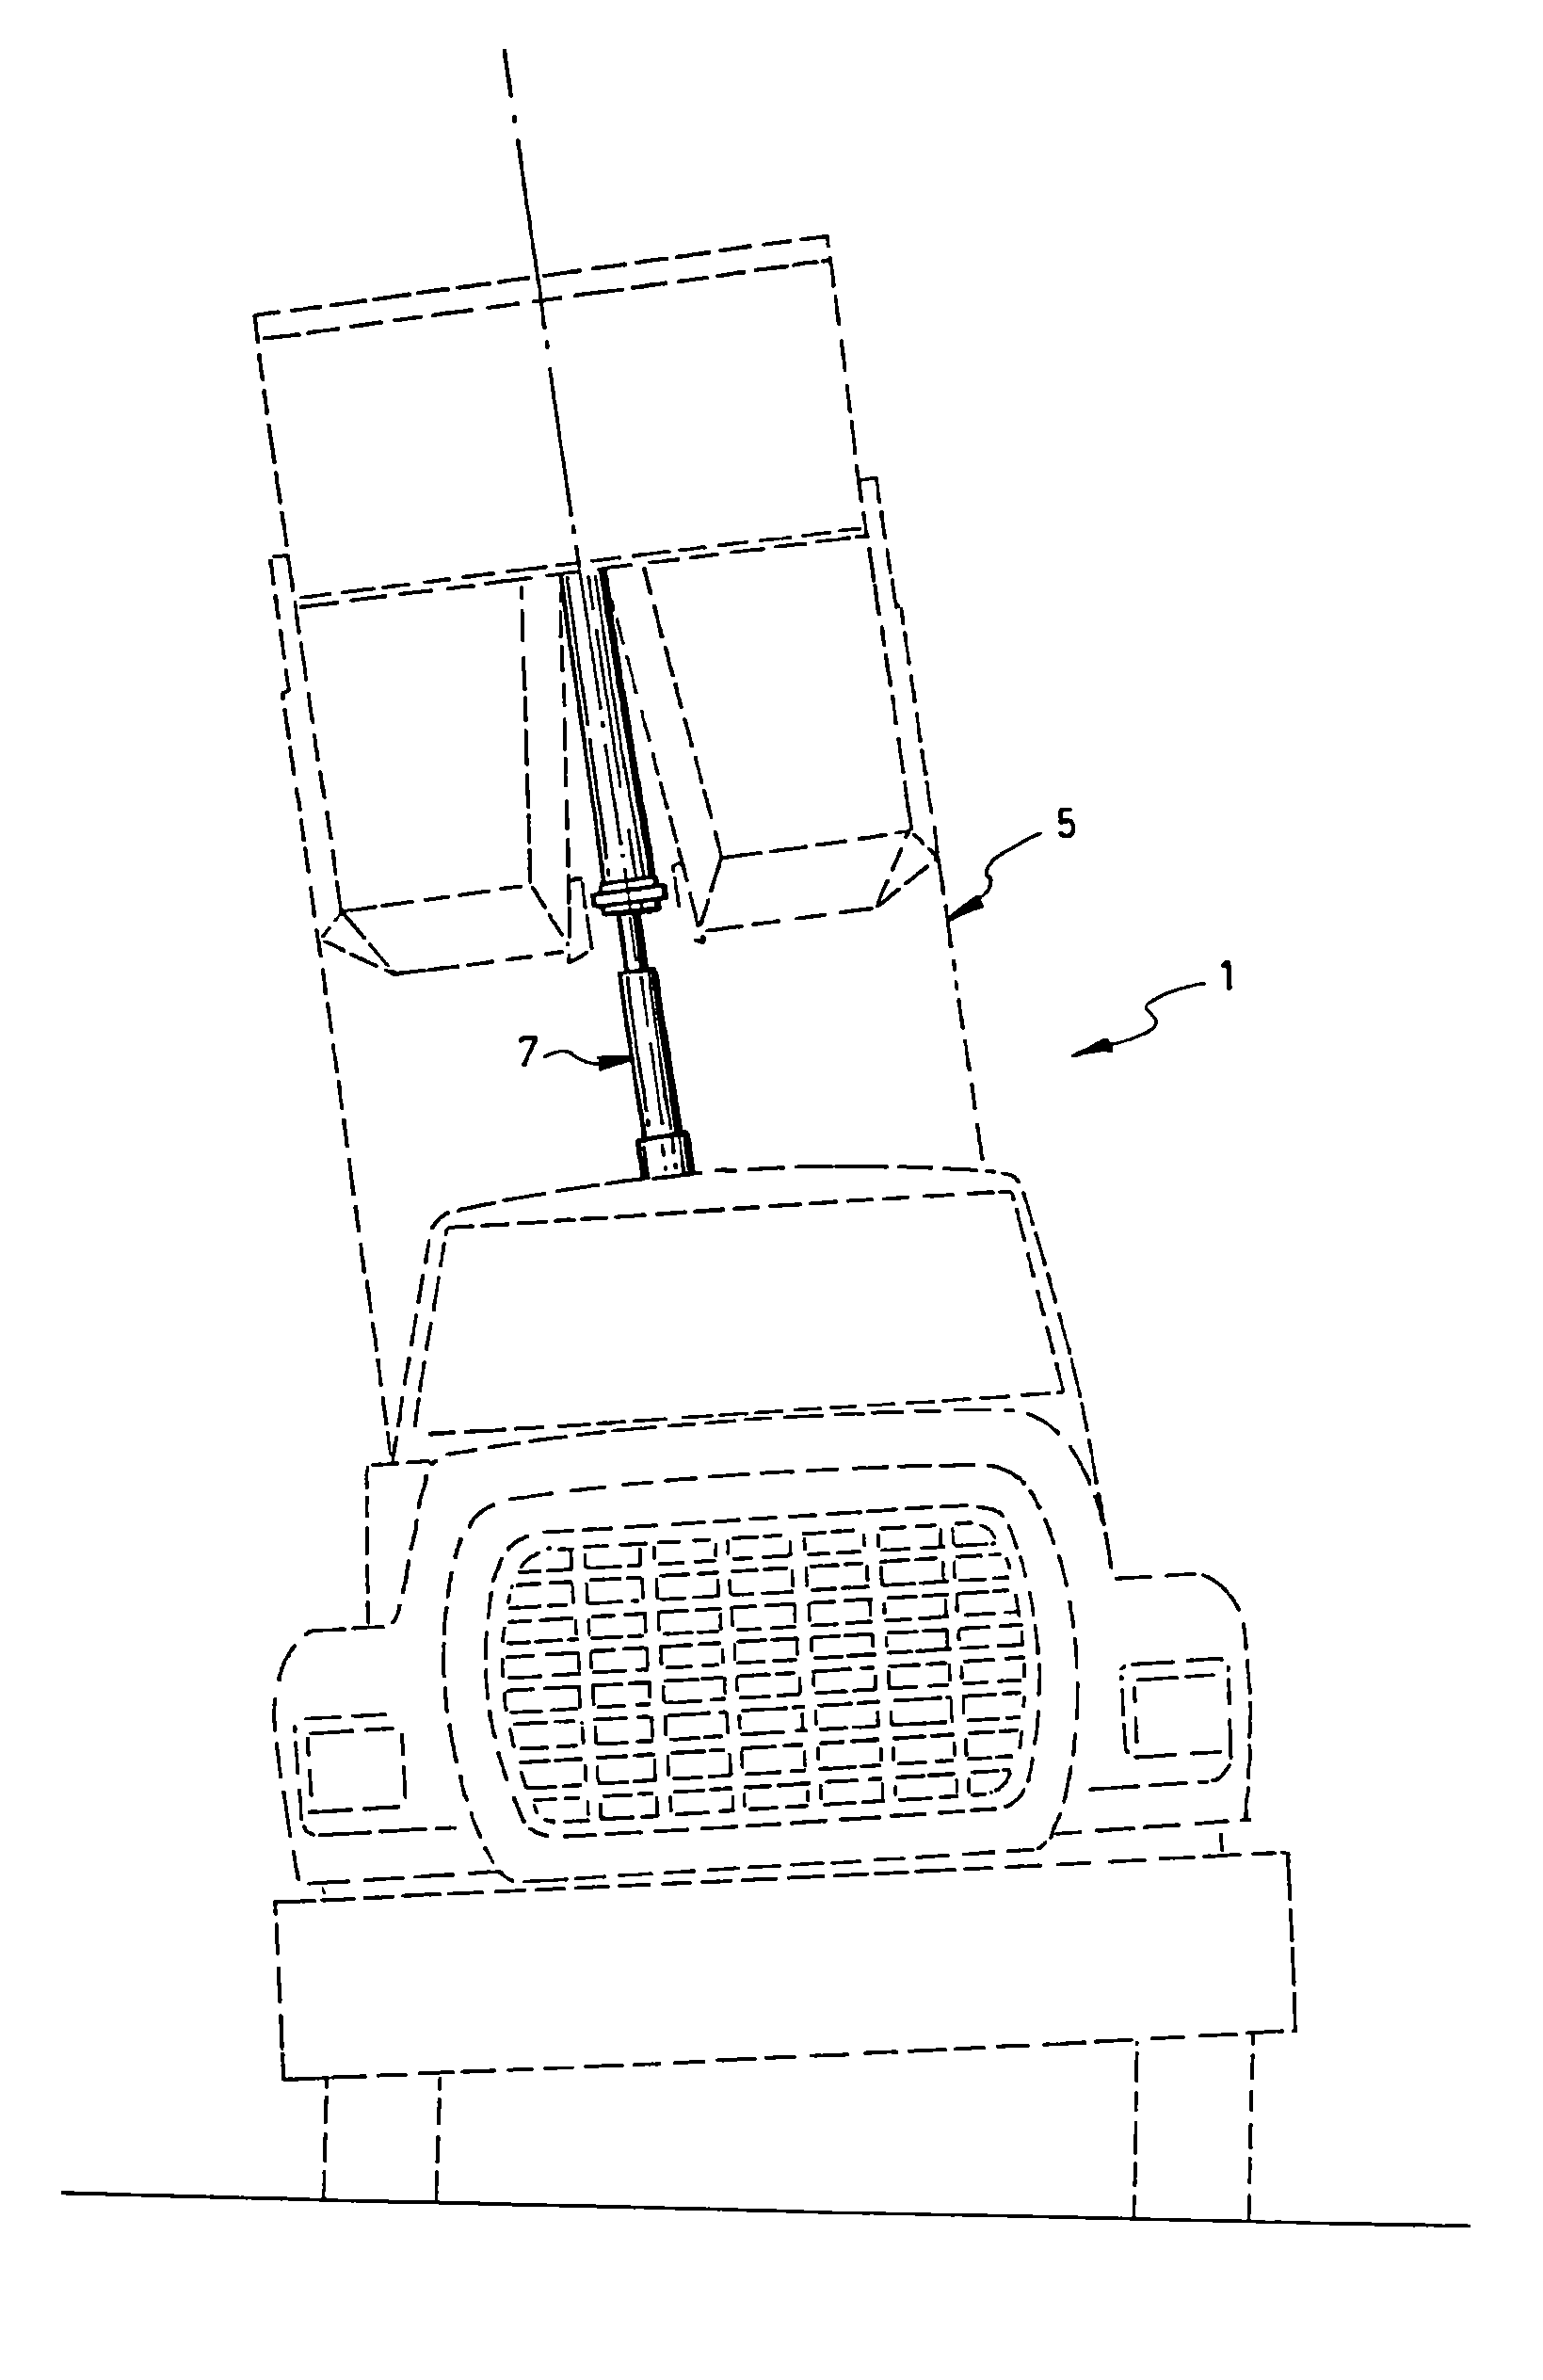 Mobile base for reducing lateral pressure of the body lift cylinder of a dump body